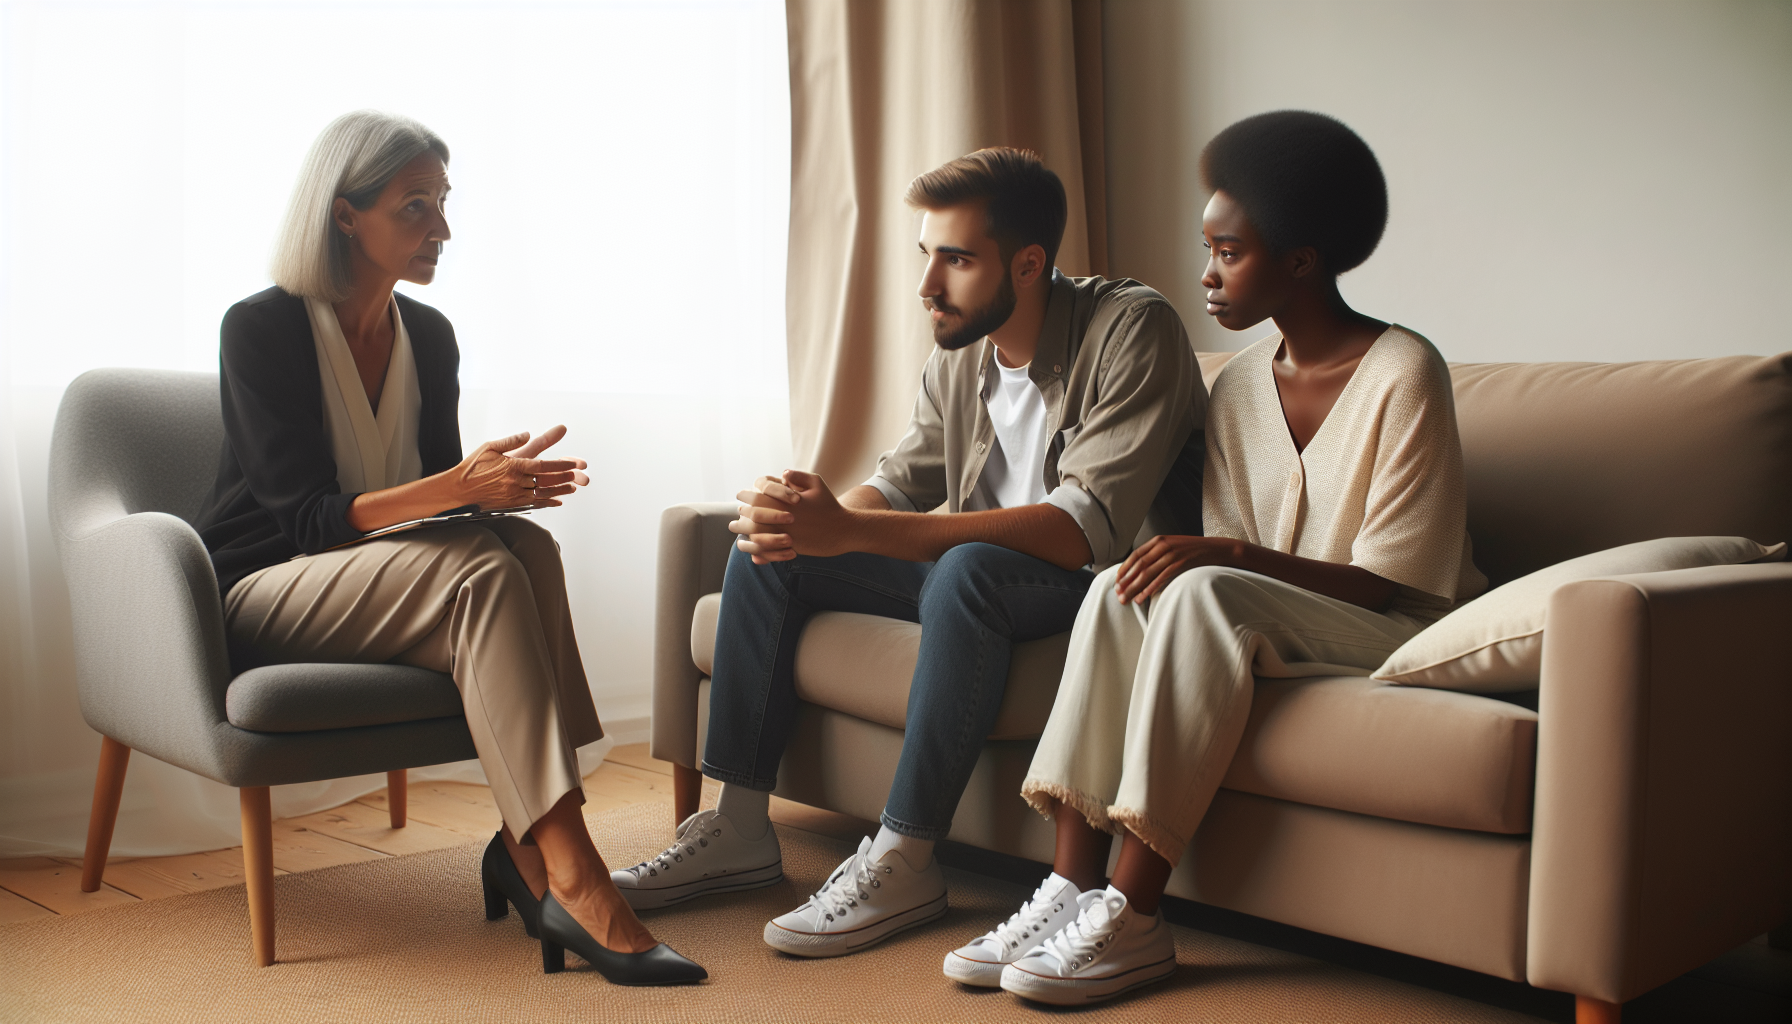 Illustration of a marriage and family therapist assisting a couple